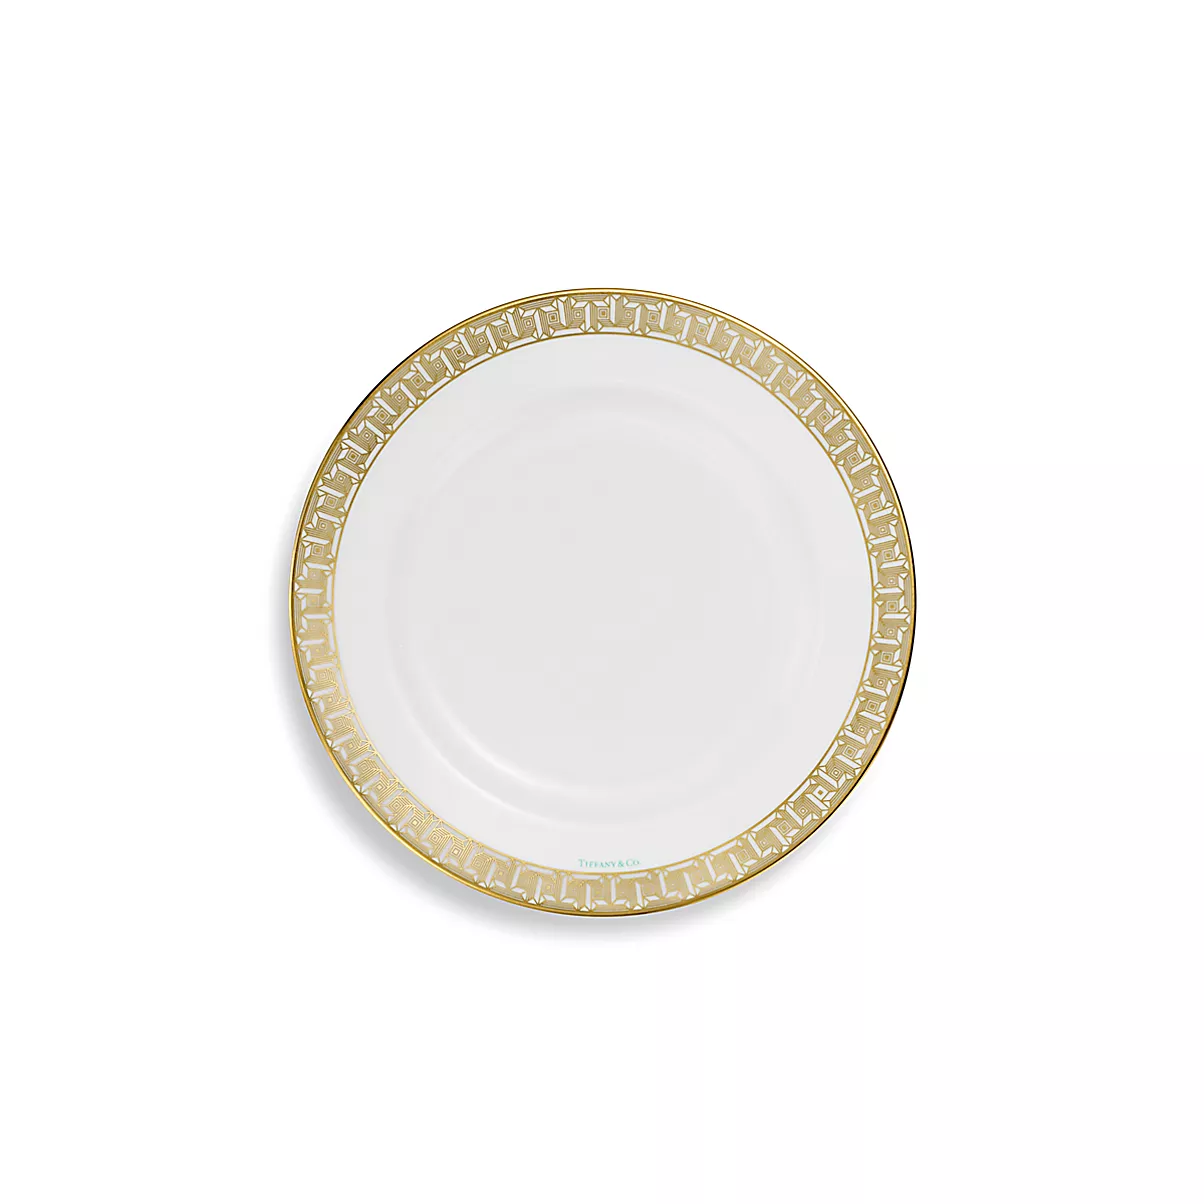 No Legal Collection Dinnerware 포슬린 0 OUNCE